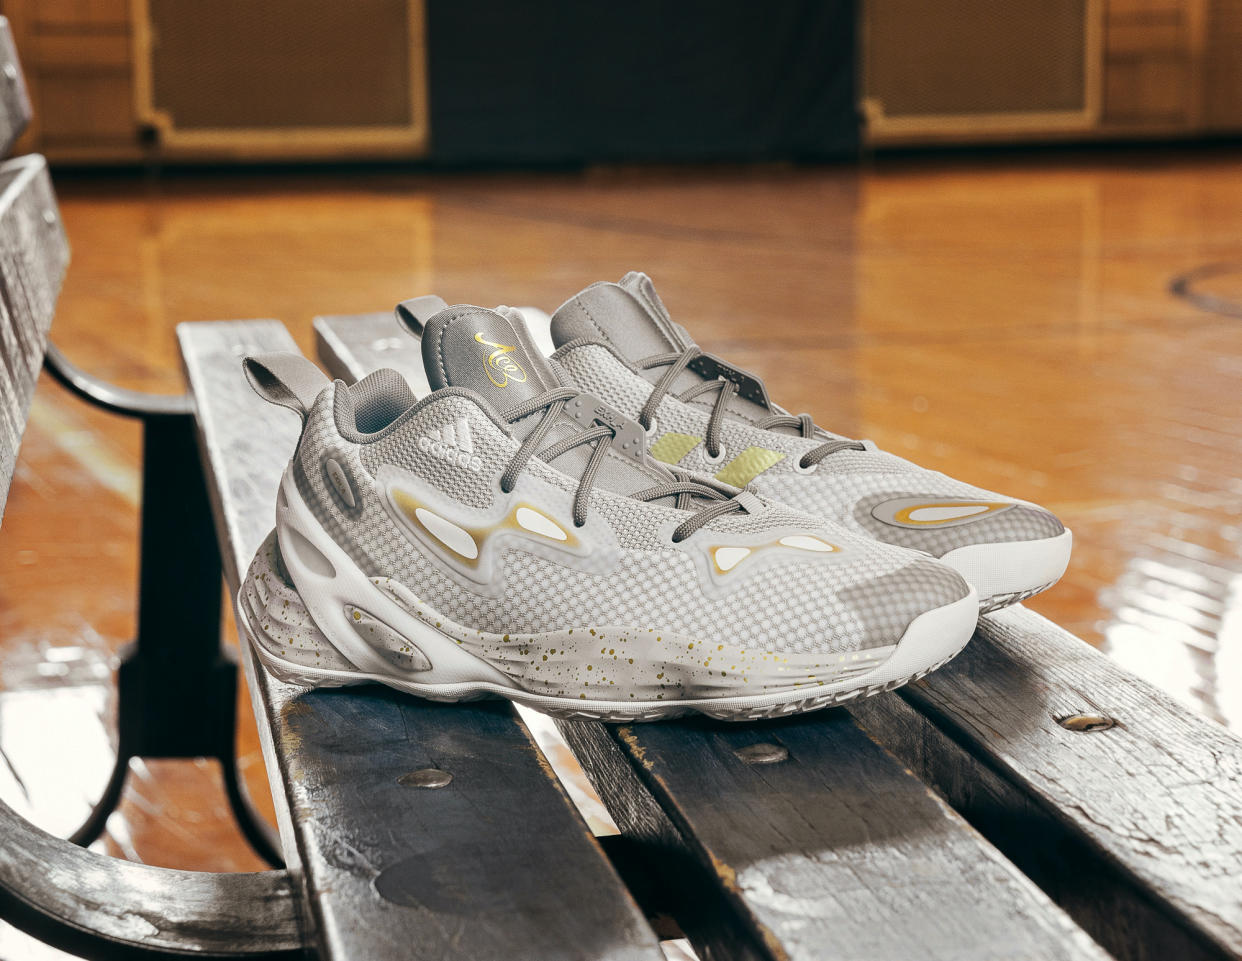 The Exhibit A(ce) pay tribute to the late Pat Summitt, Parker's coach during her college years at Tennessee. (Photo by Adidas)